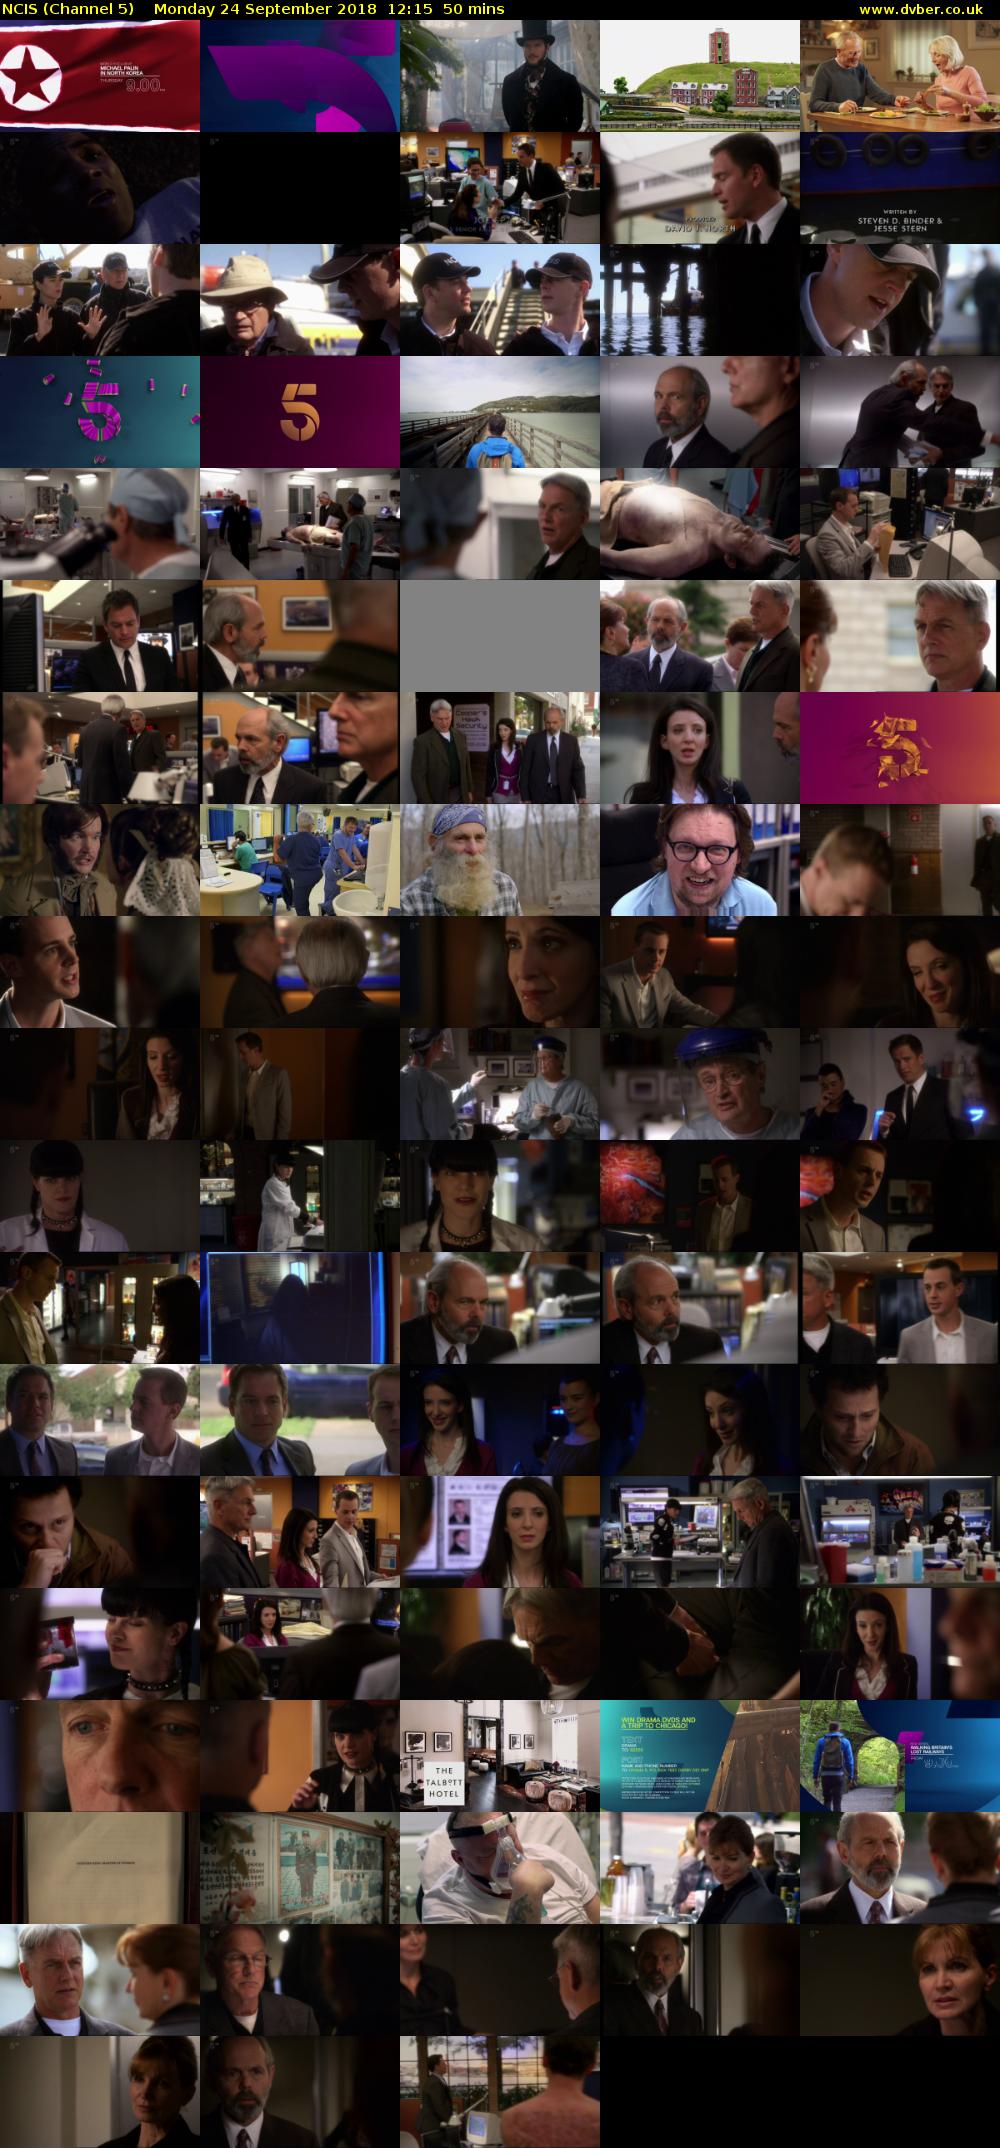 NCIS (Channel 5) Monday 24 September 2018 12:15 - 13:05